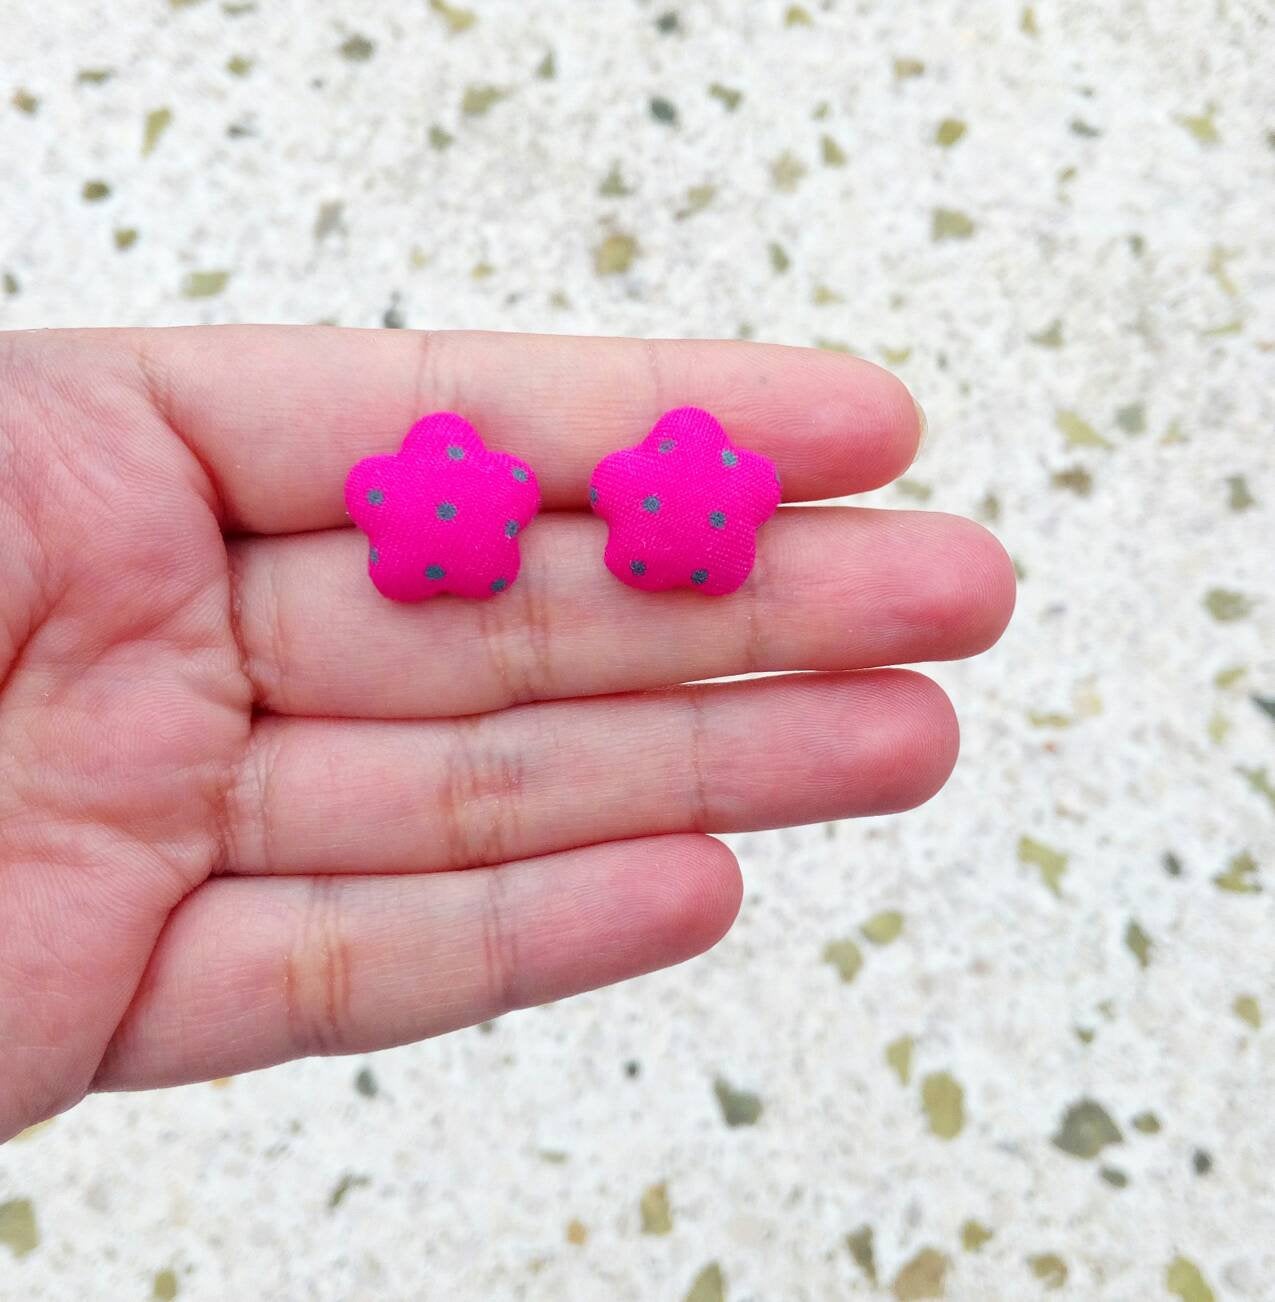 Star Button Earrings, Polka Dot Studs, Cute Everyday Jewellery For Her